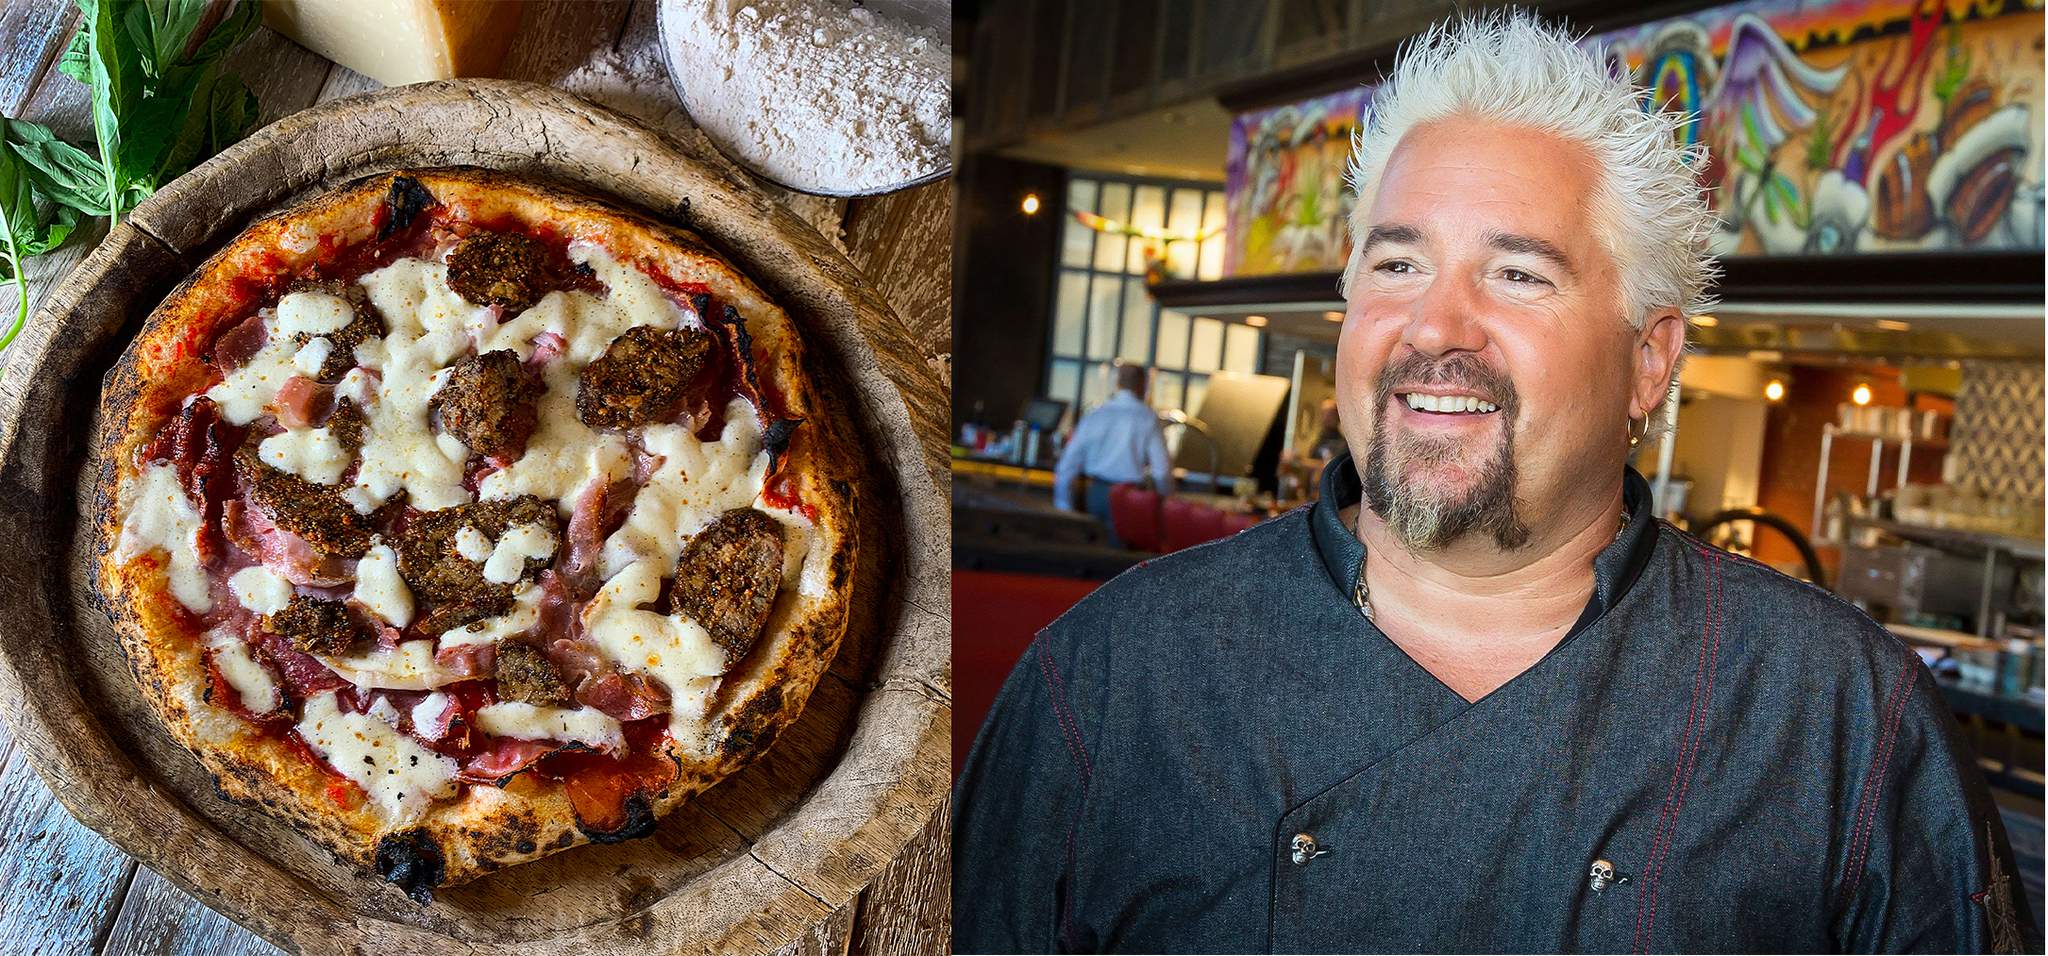 San Antonio pizzeria to be featured on Diners, Drive-ins and Dives on Friday night